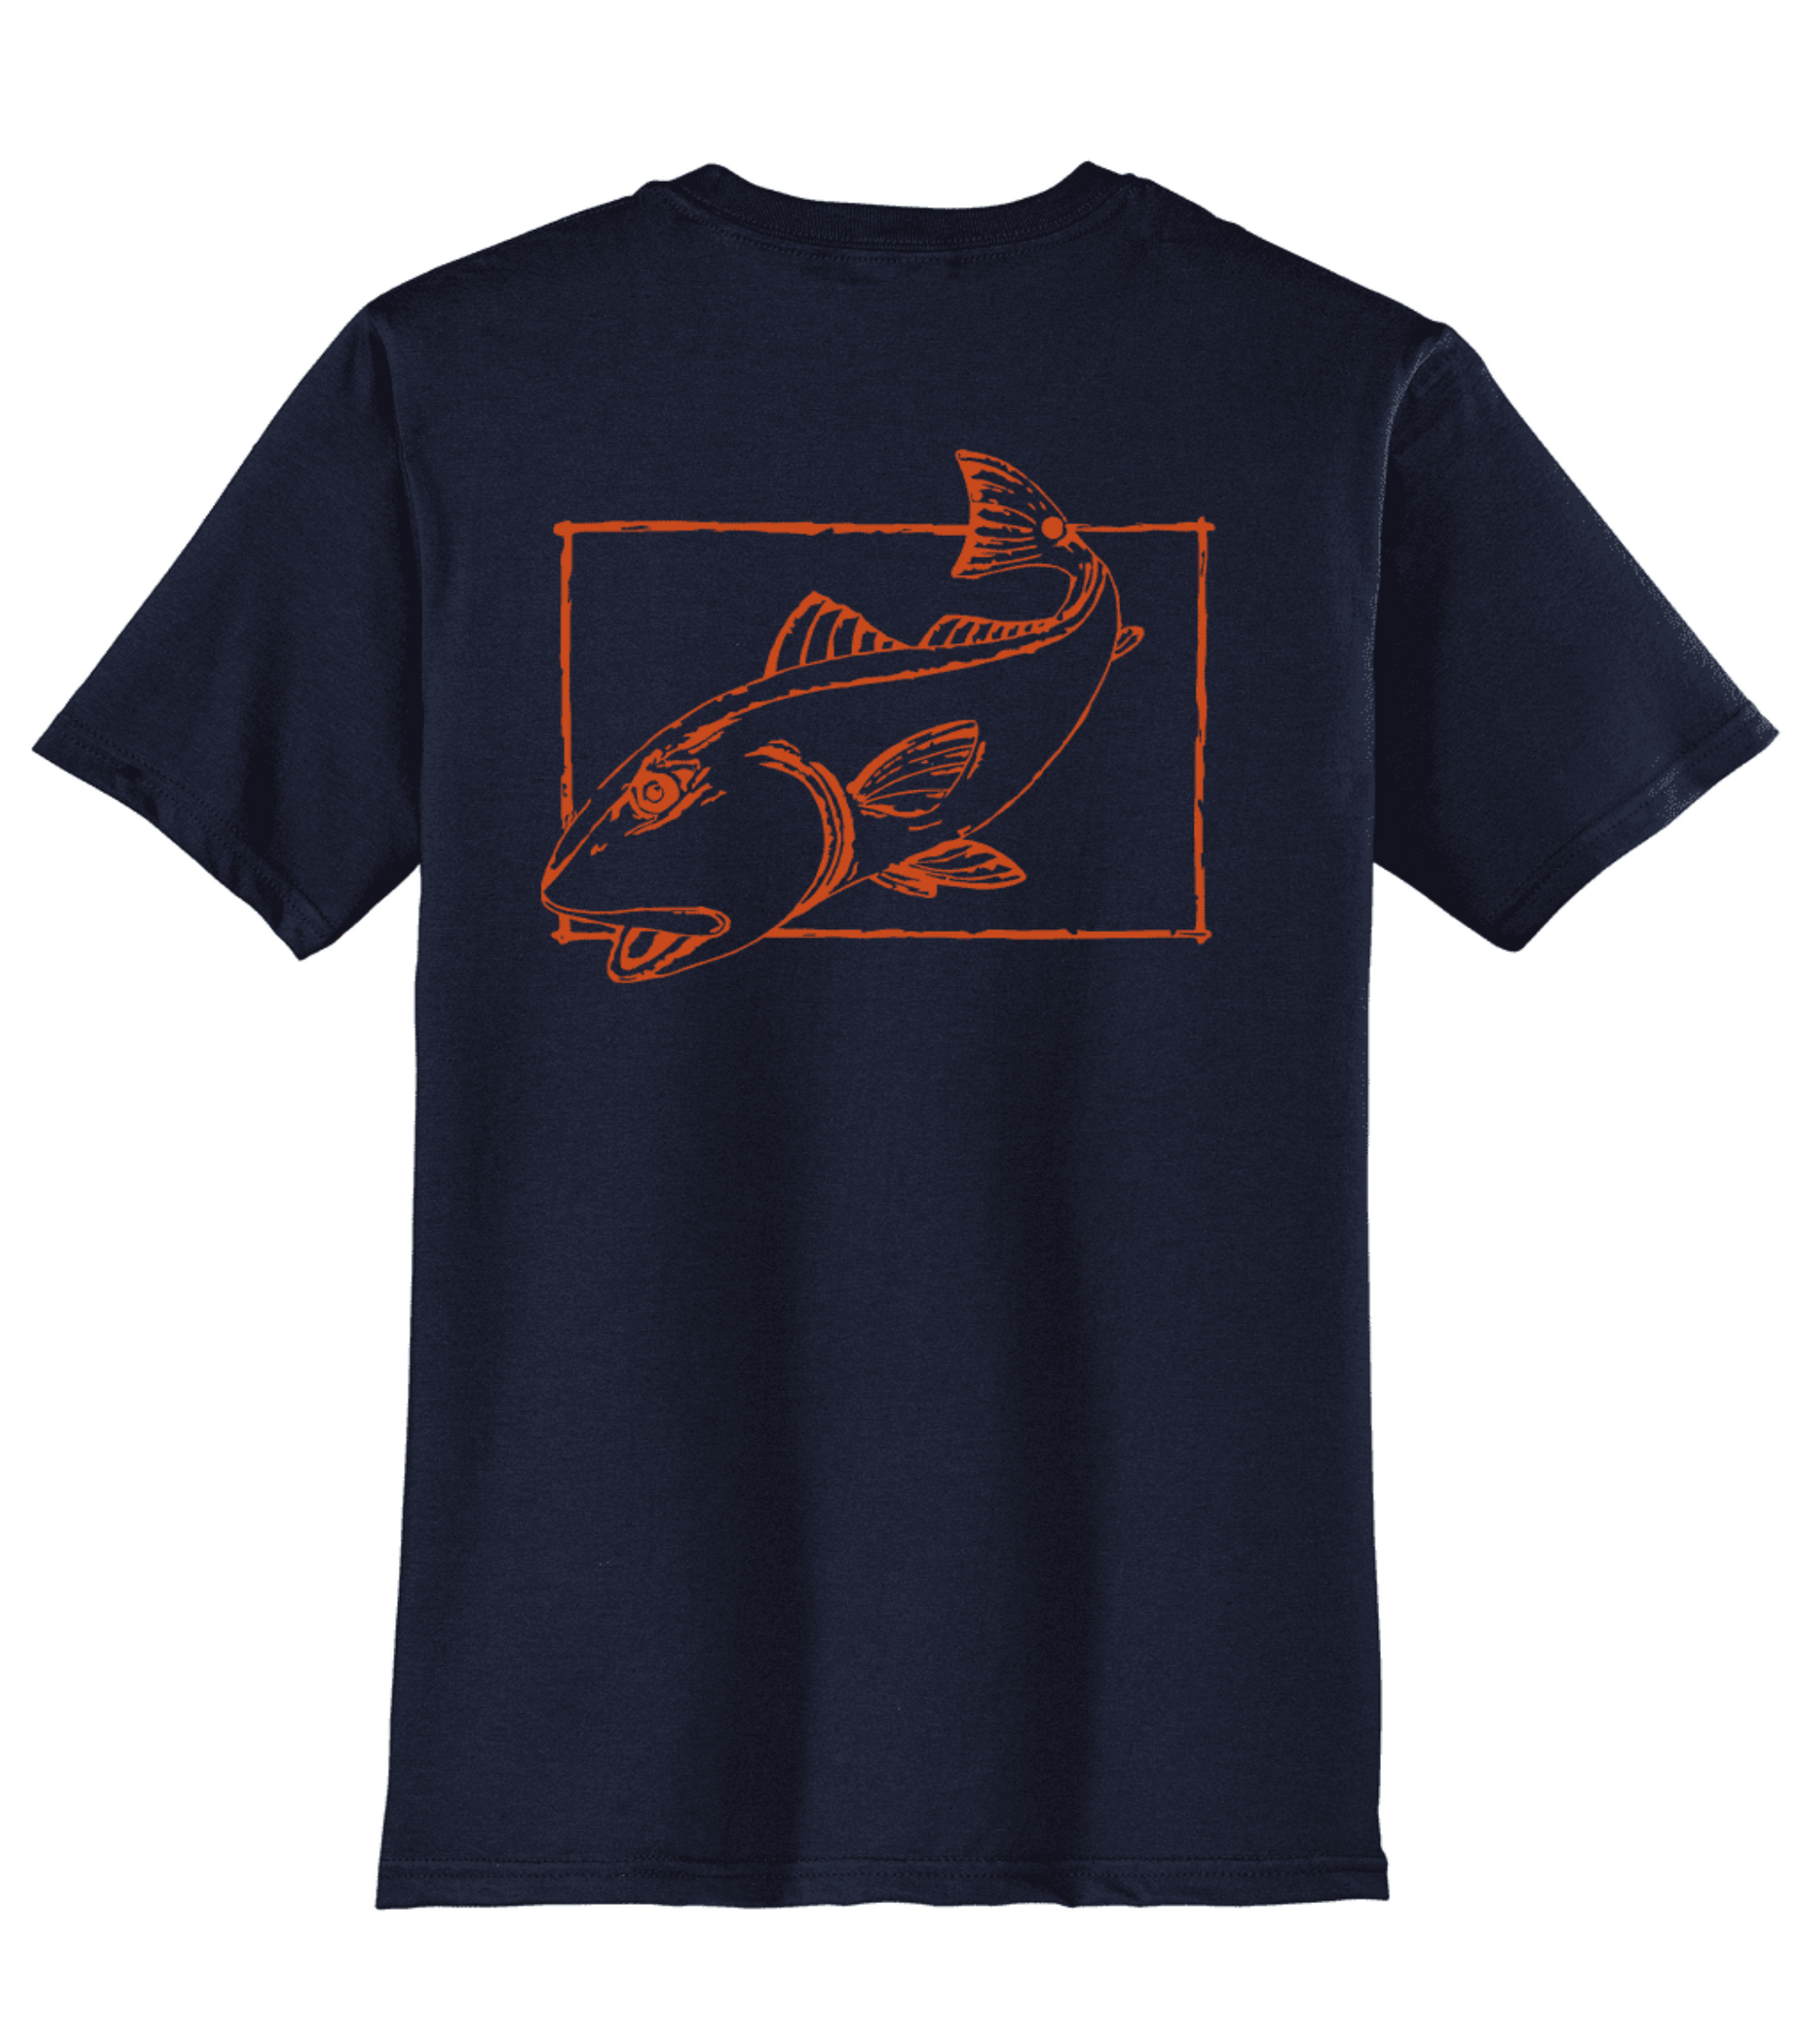 Redfish Cotton T-shirt in Navy by Reel Fishy